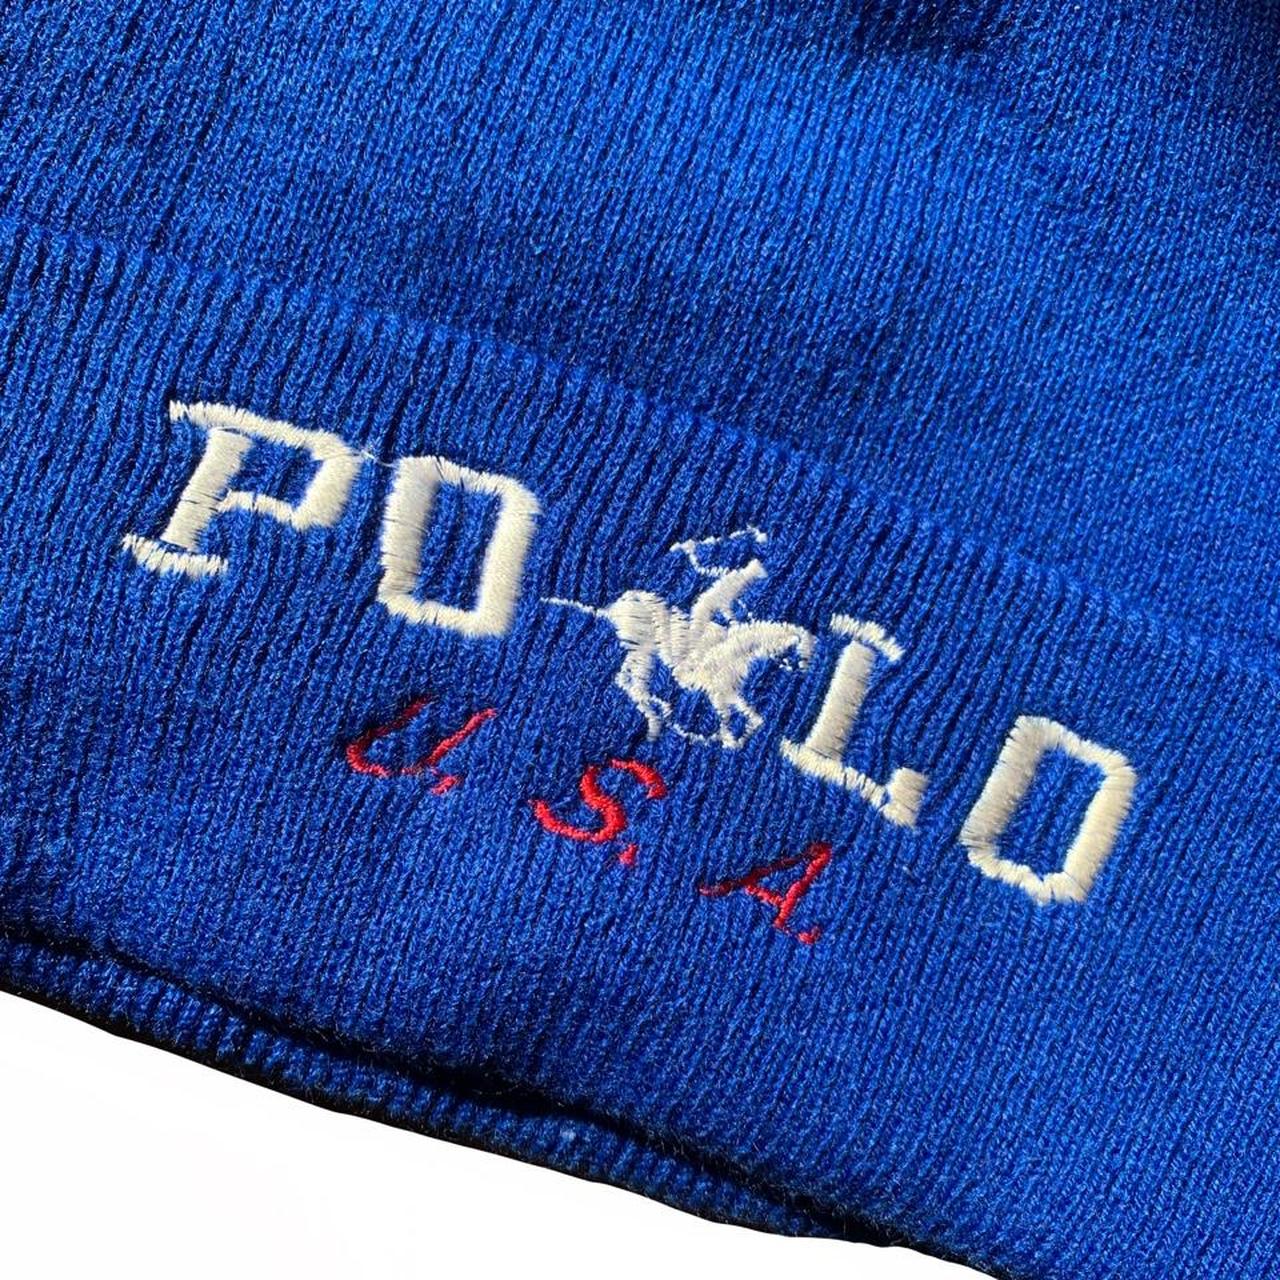 U.S. Polo Assn. Men's Blue and Red Hat (2)